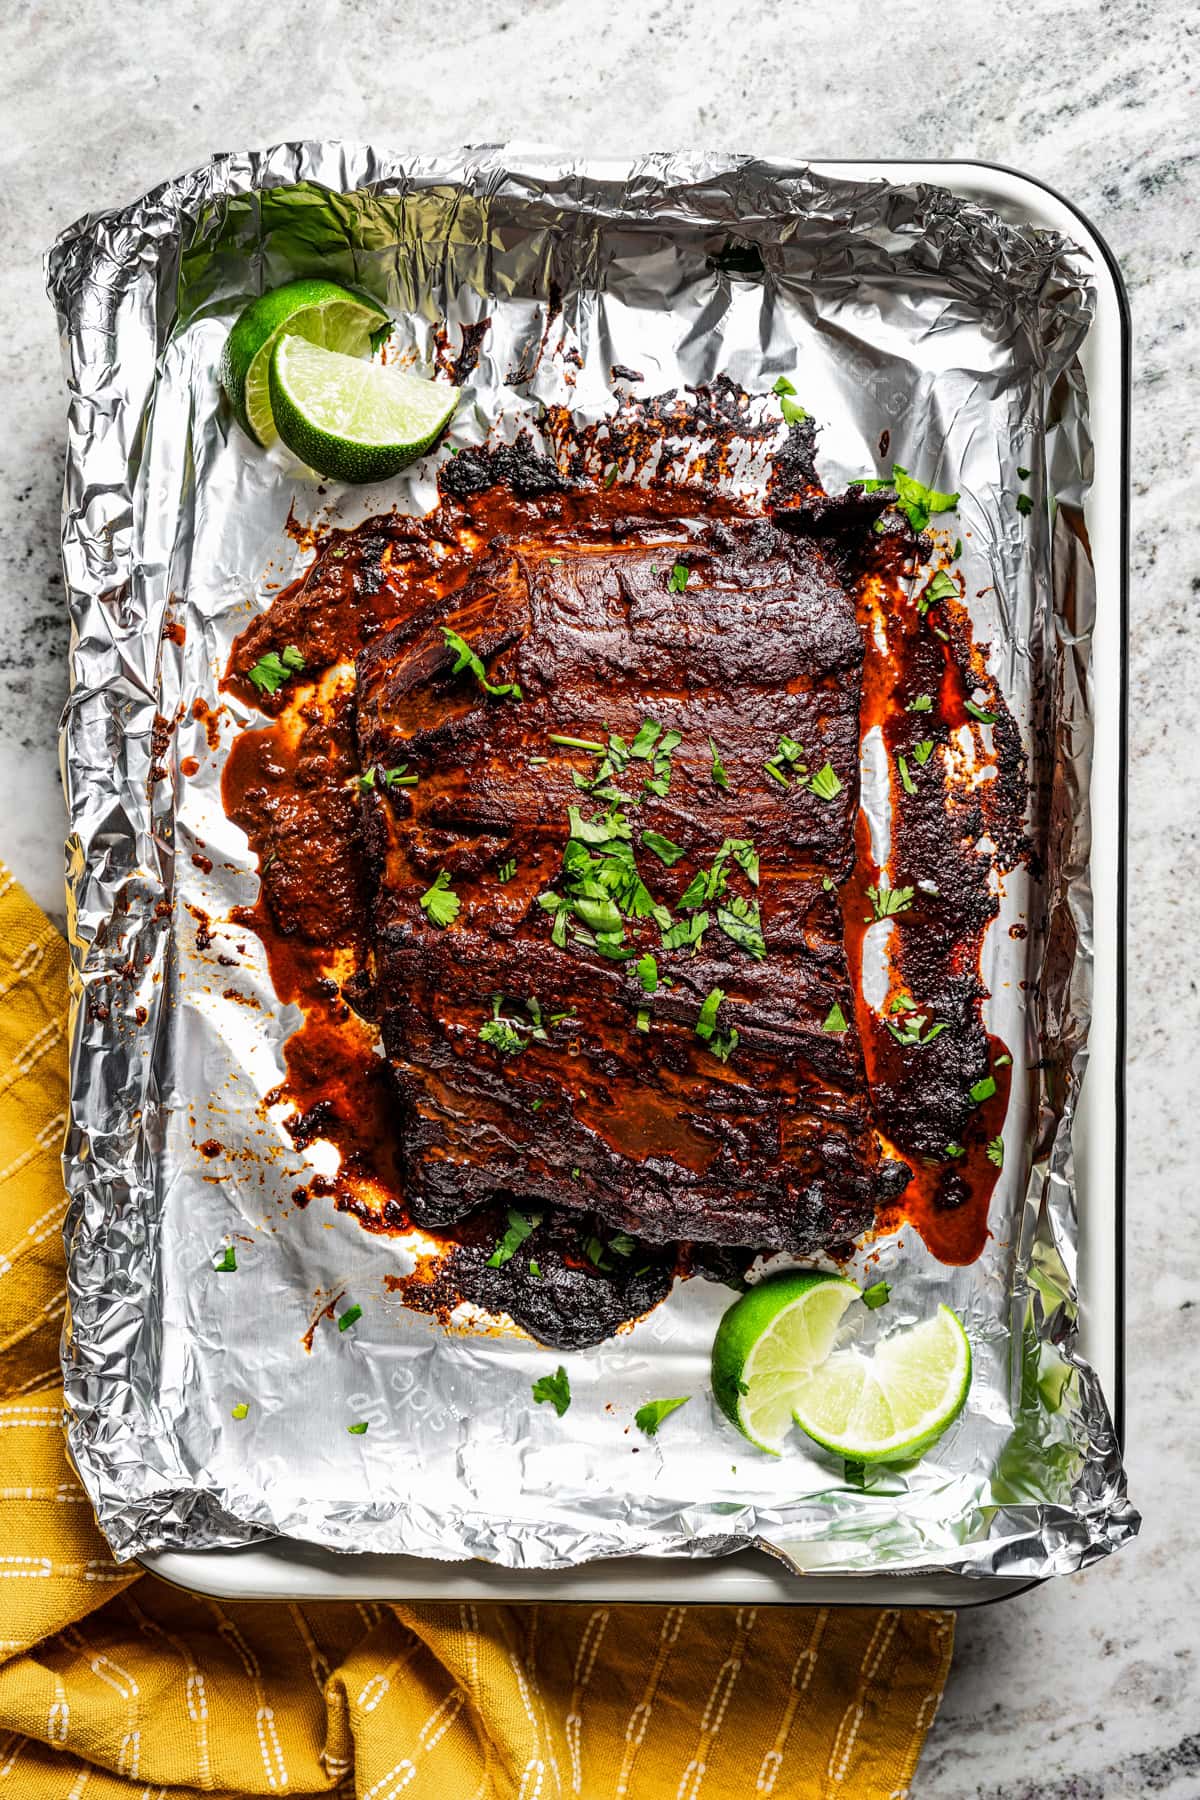 Overhead view of a steak on a foil-lined baking sheet.